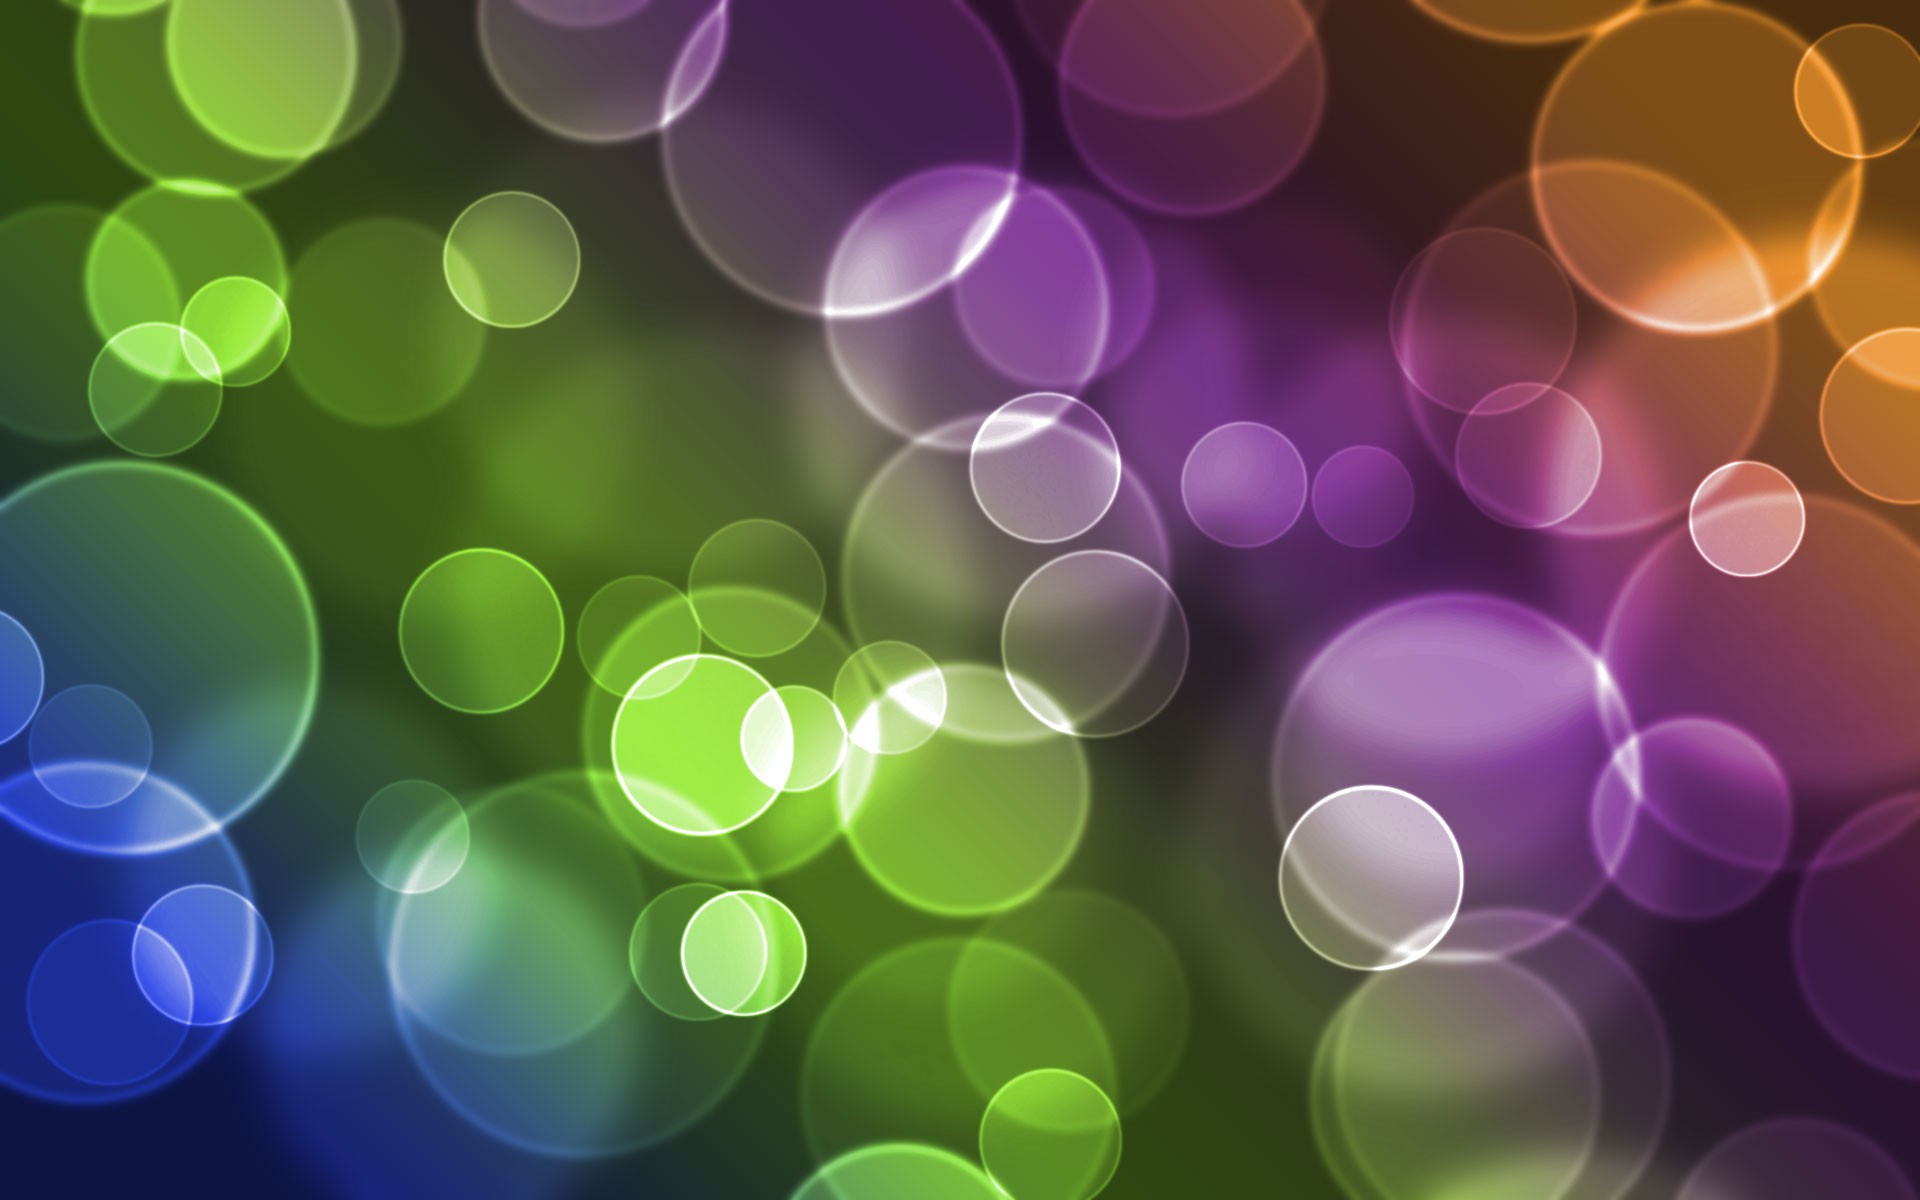 wallpaper themes for android,green,purple,violet,light,circle